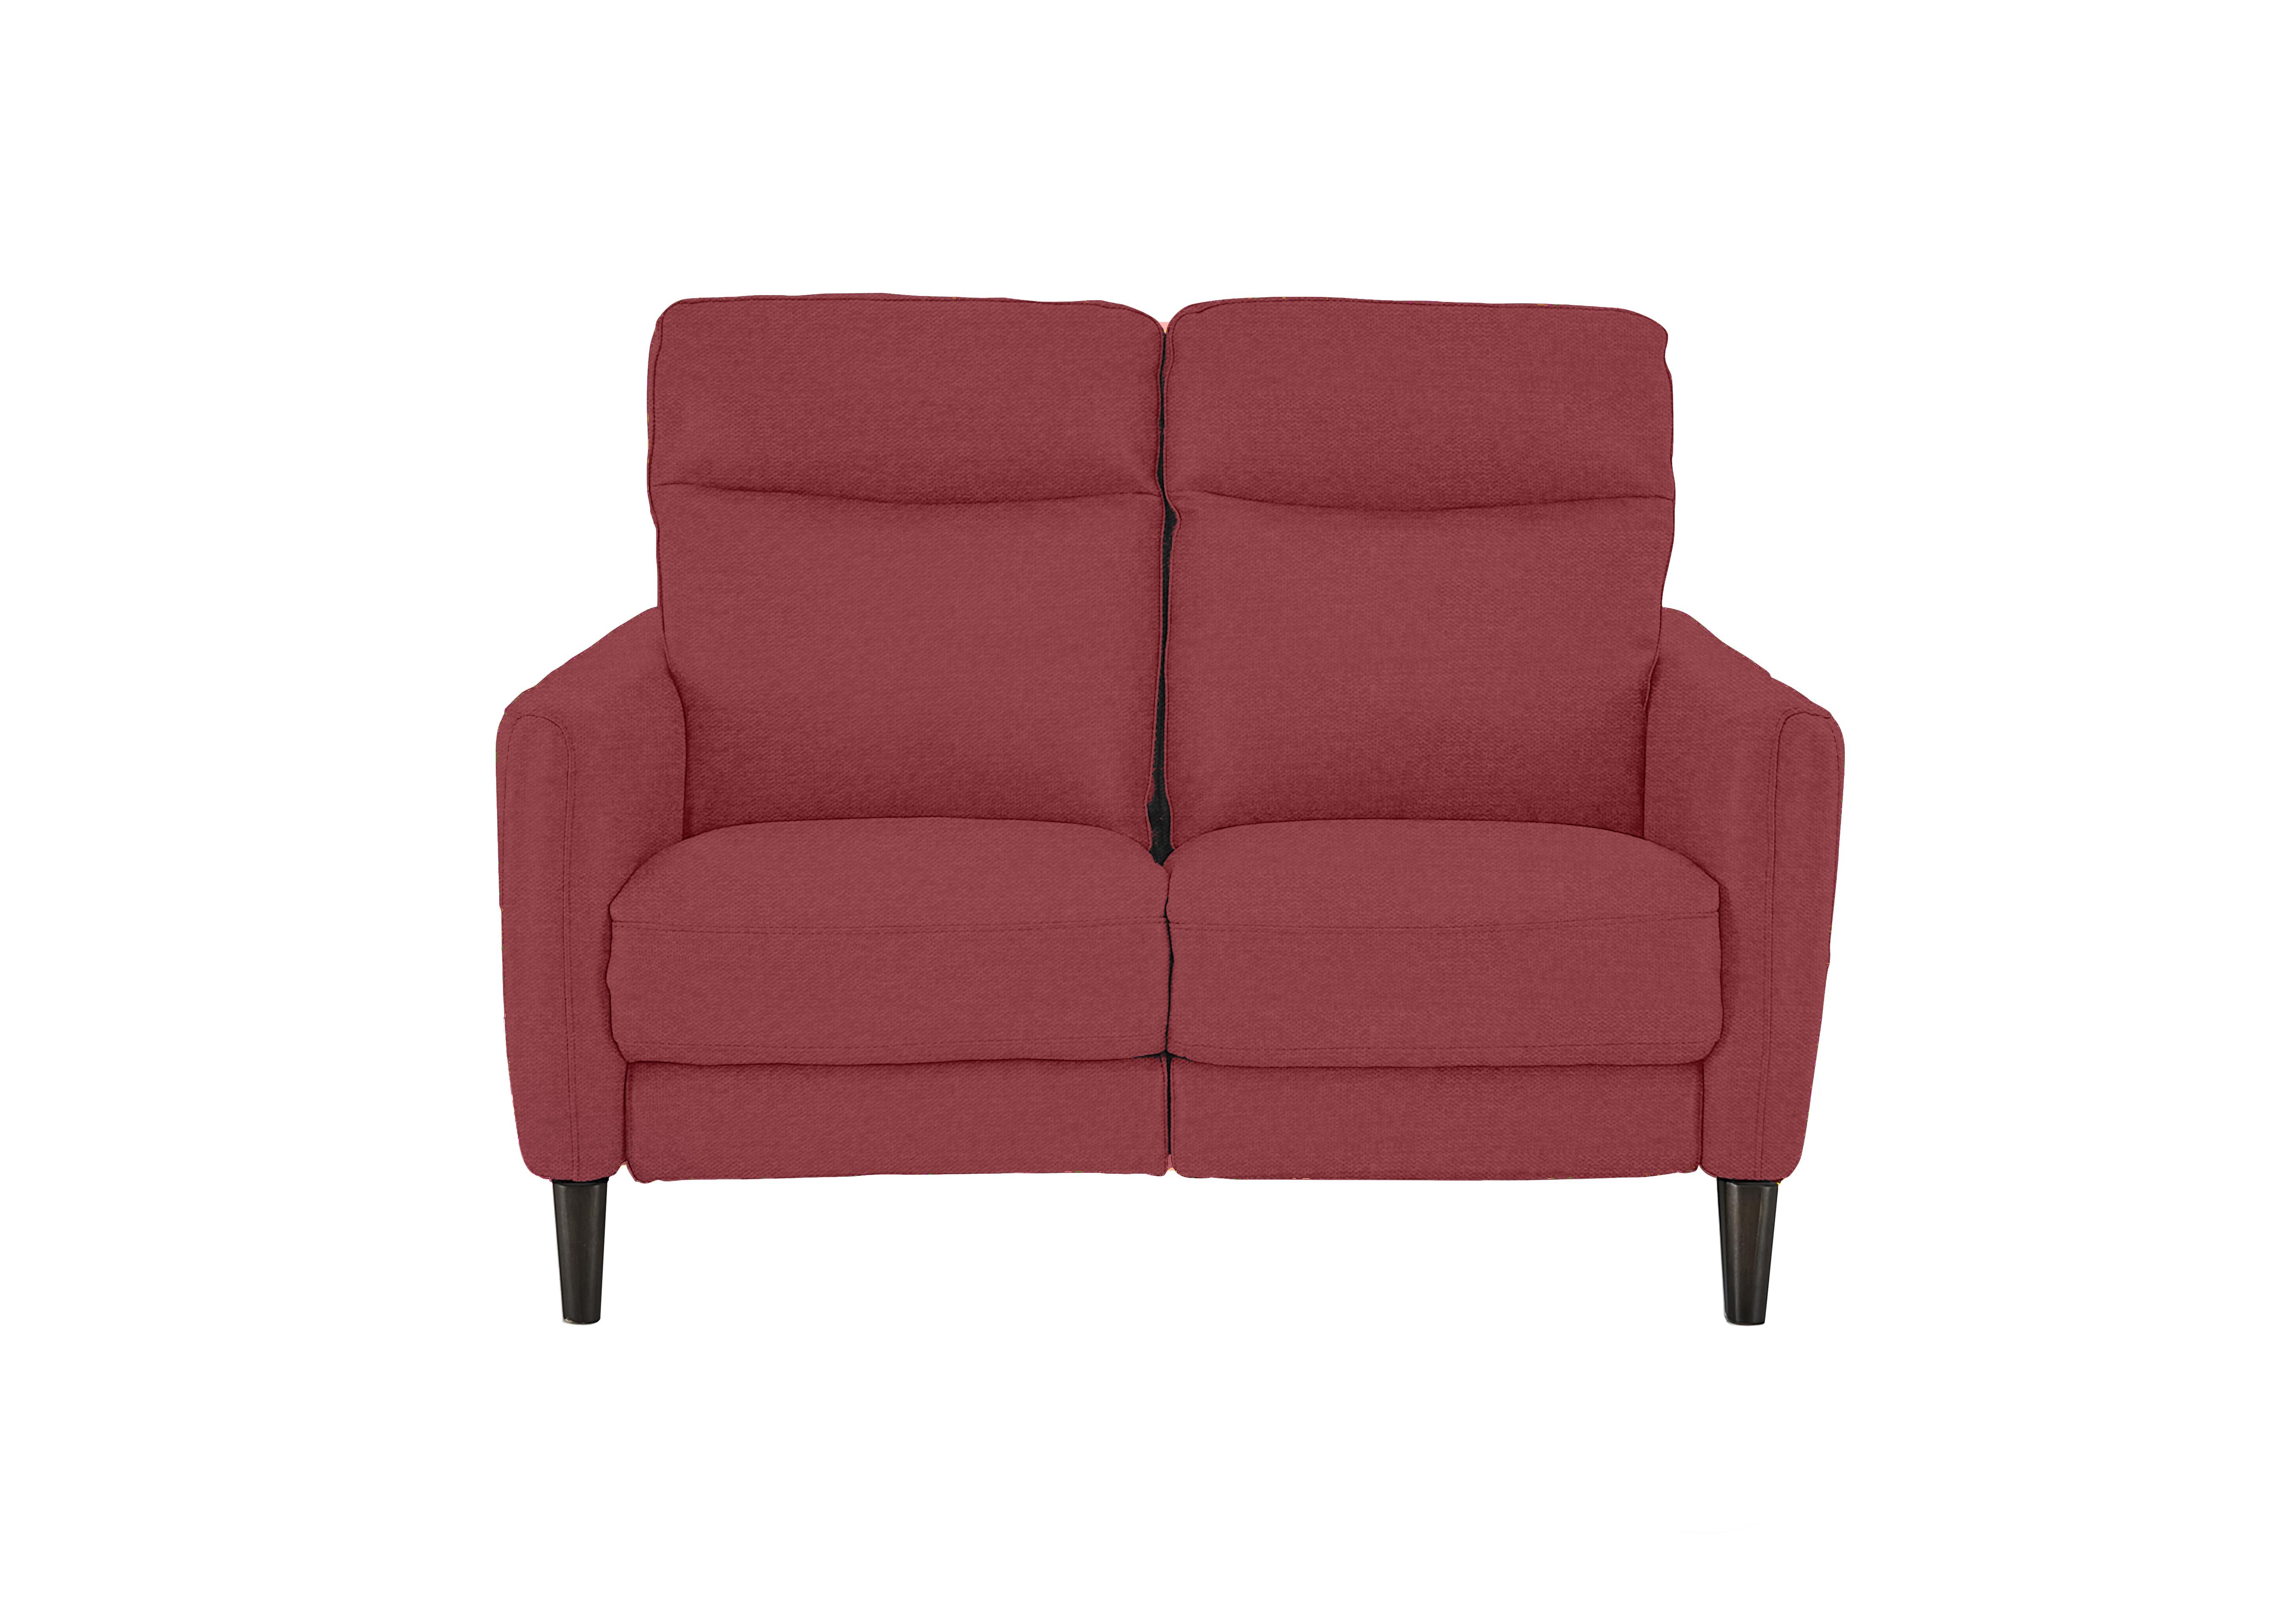 Compact Collection Petit 2 Seater Fabric Sofa in Fab-Blt-R29 Red on Furniture Village